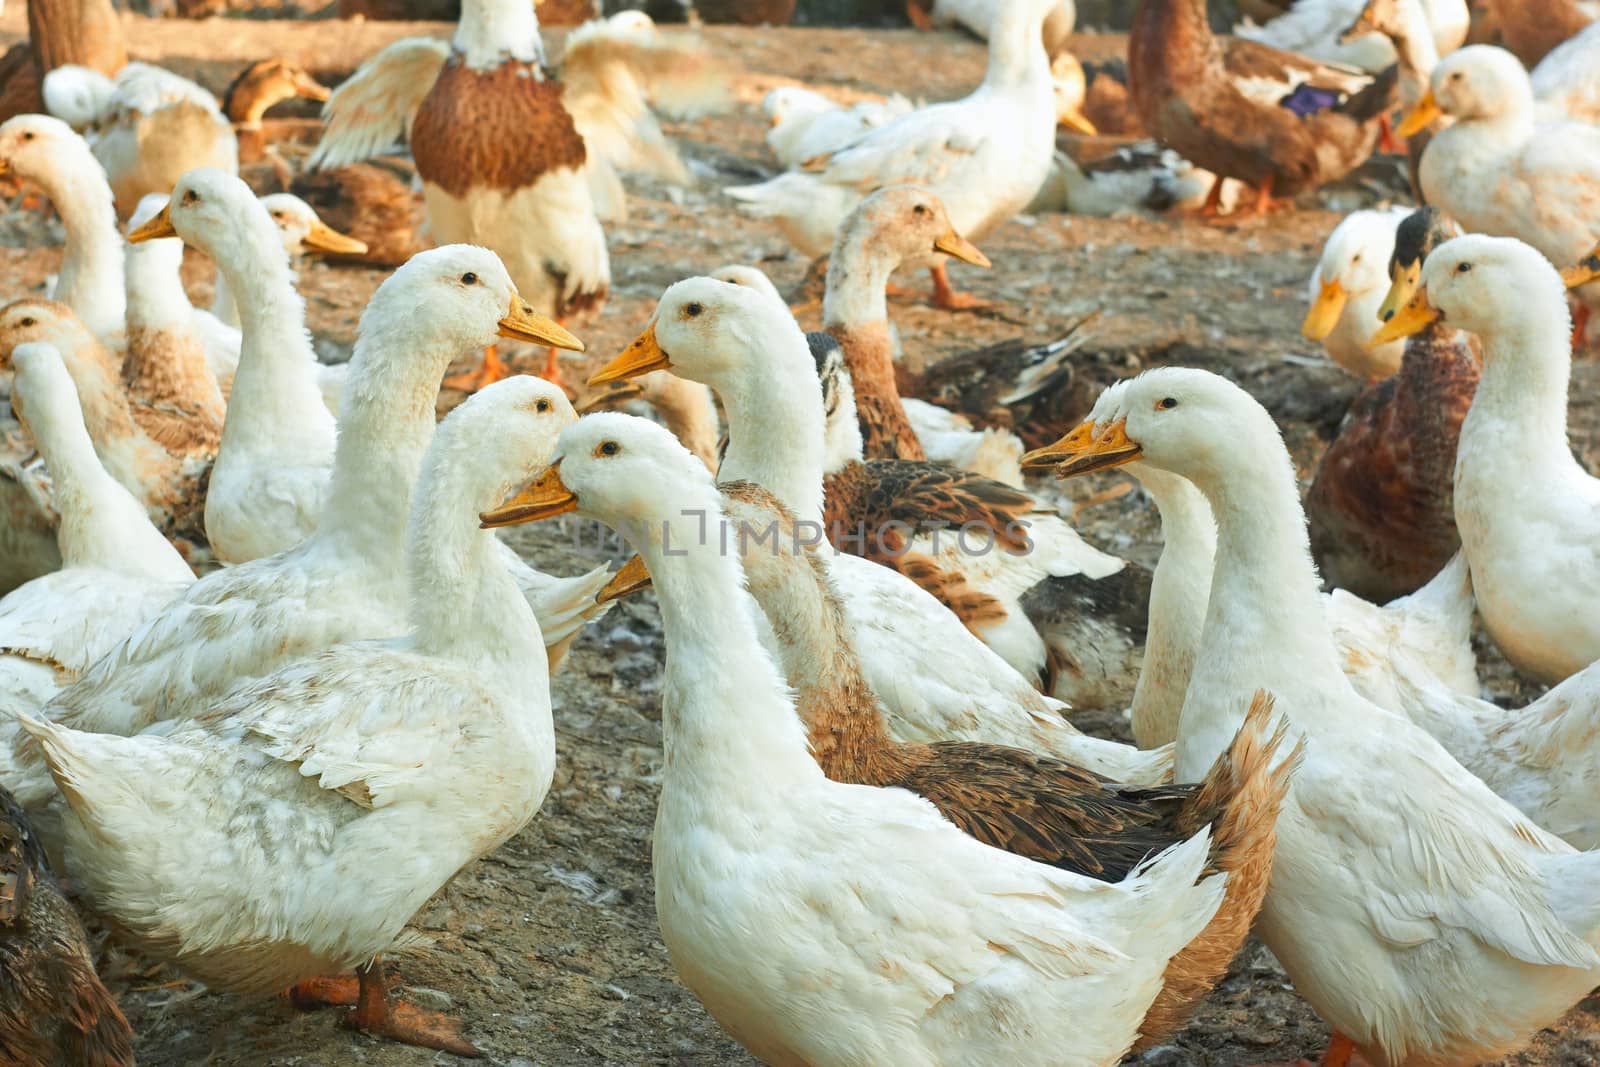 Ducks in the poultry yard by qiiip